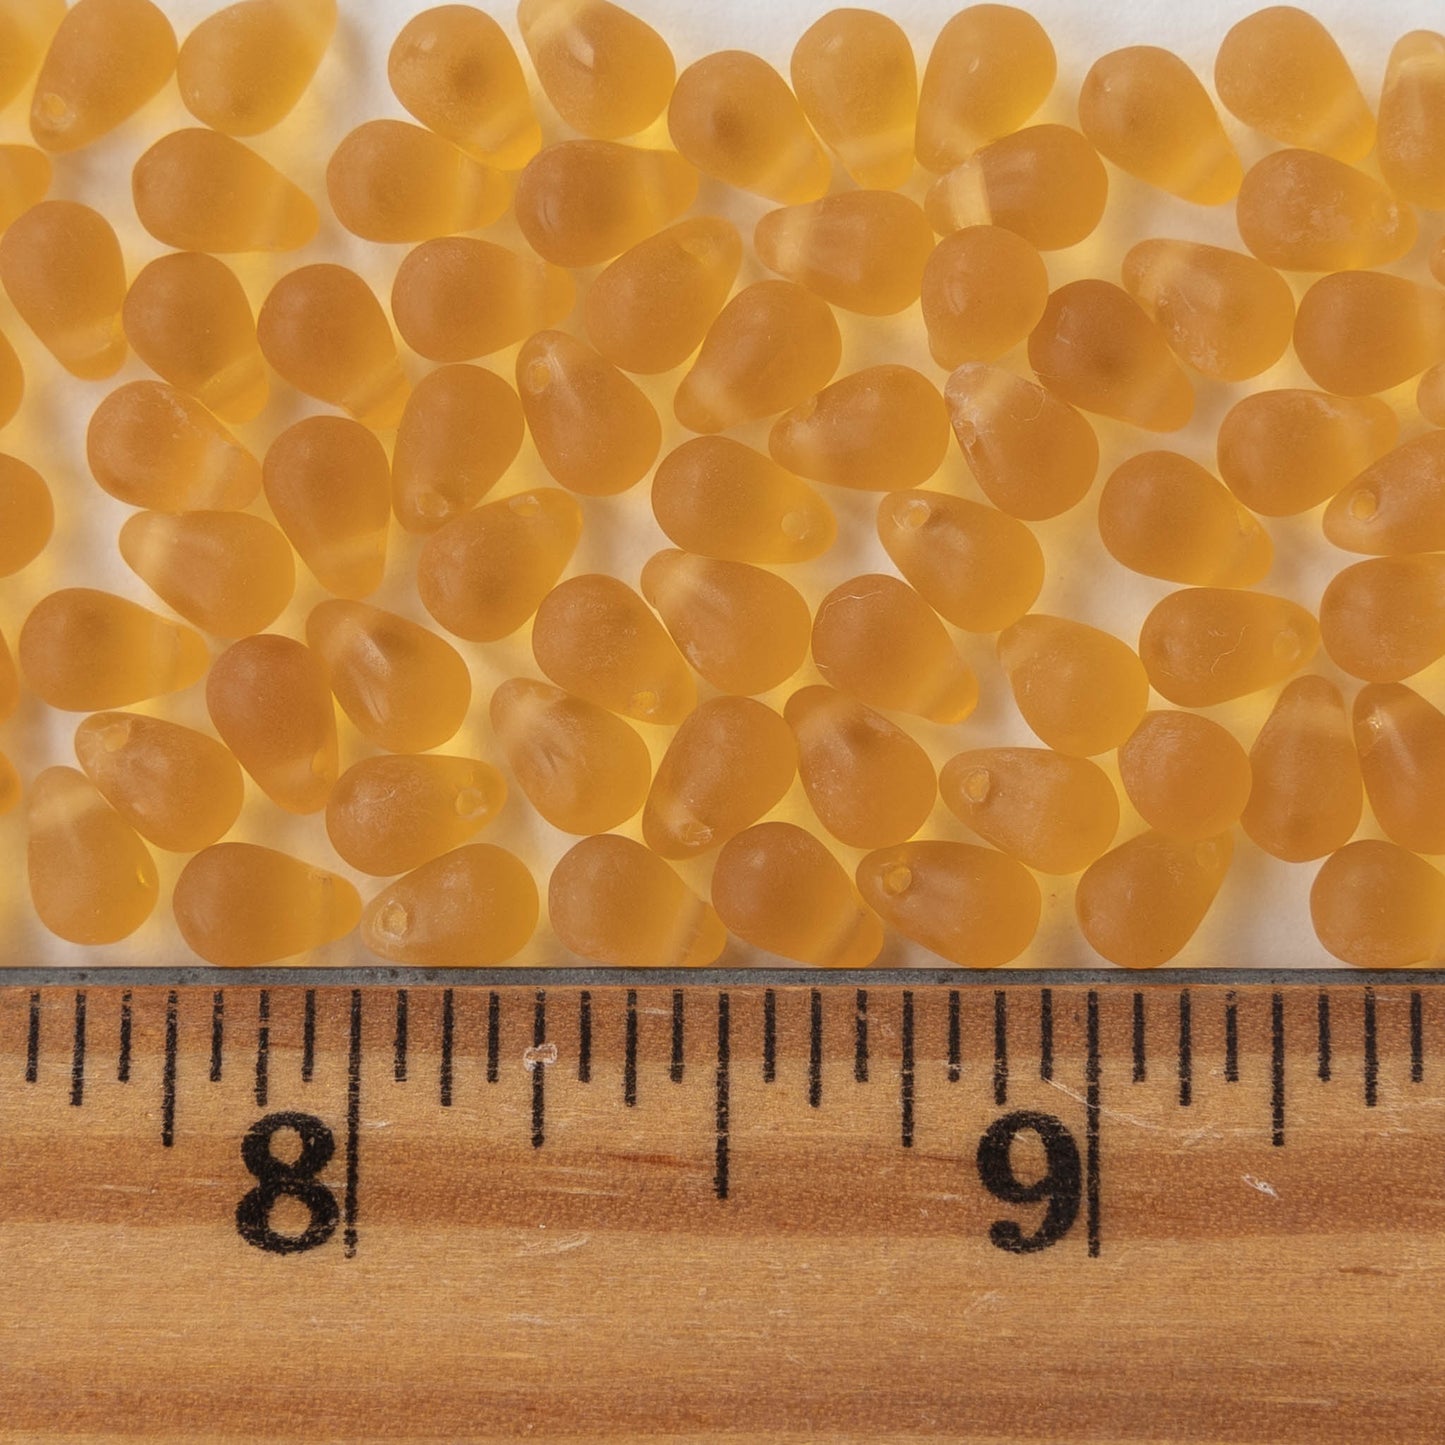 4x6mm Frosted Glass Teardrops - Amber Topaz - 100 Beads